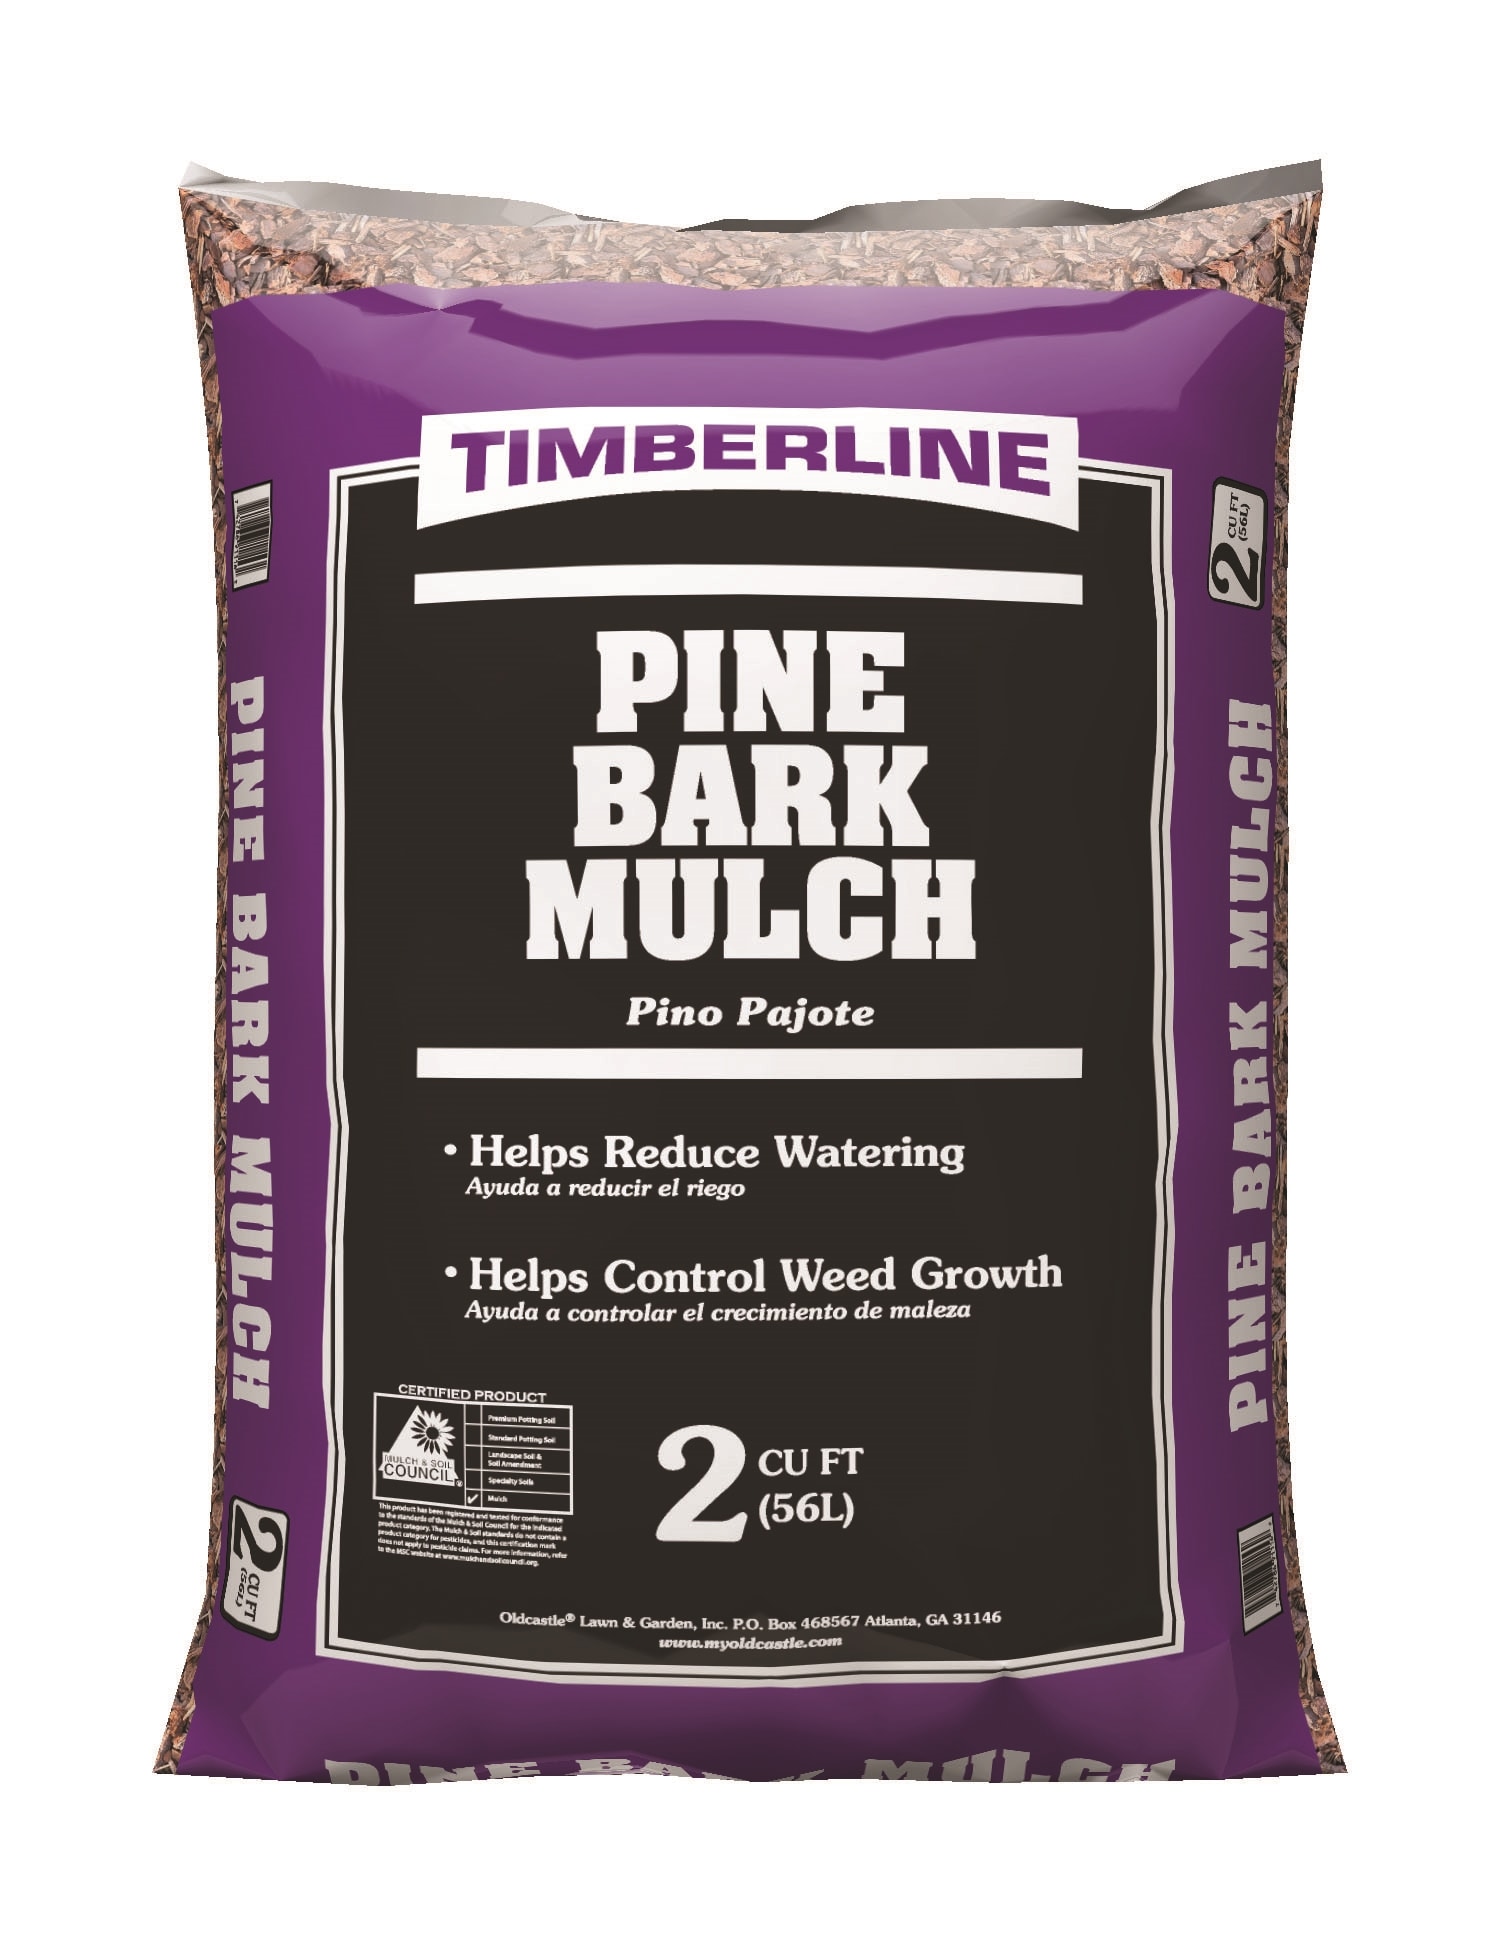 How To Choose The Right Mulch Mulch Buying Guide, 55 OFF